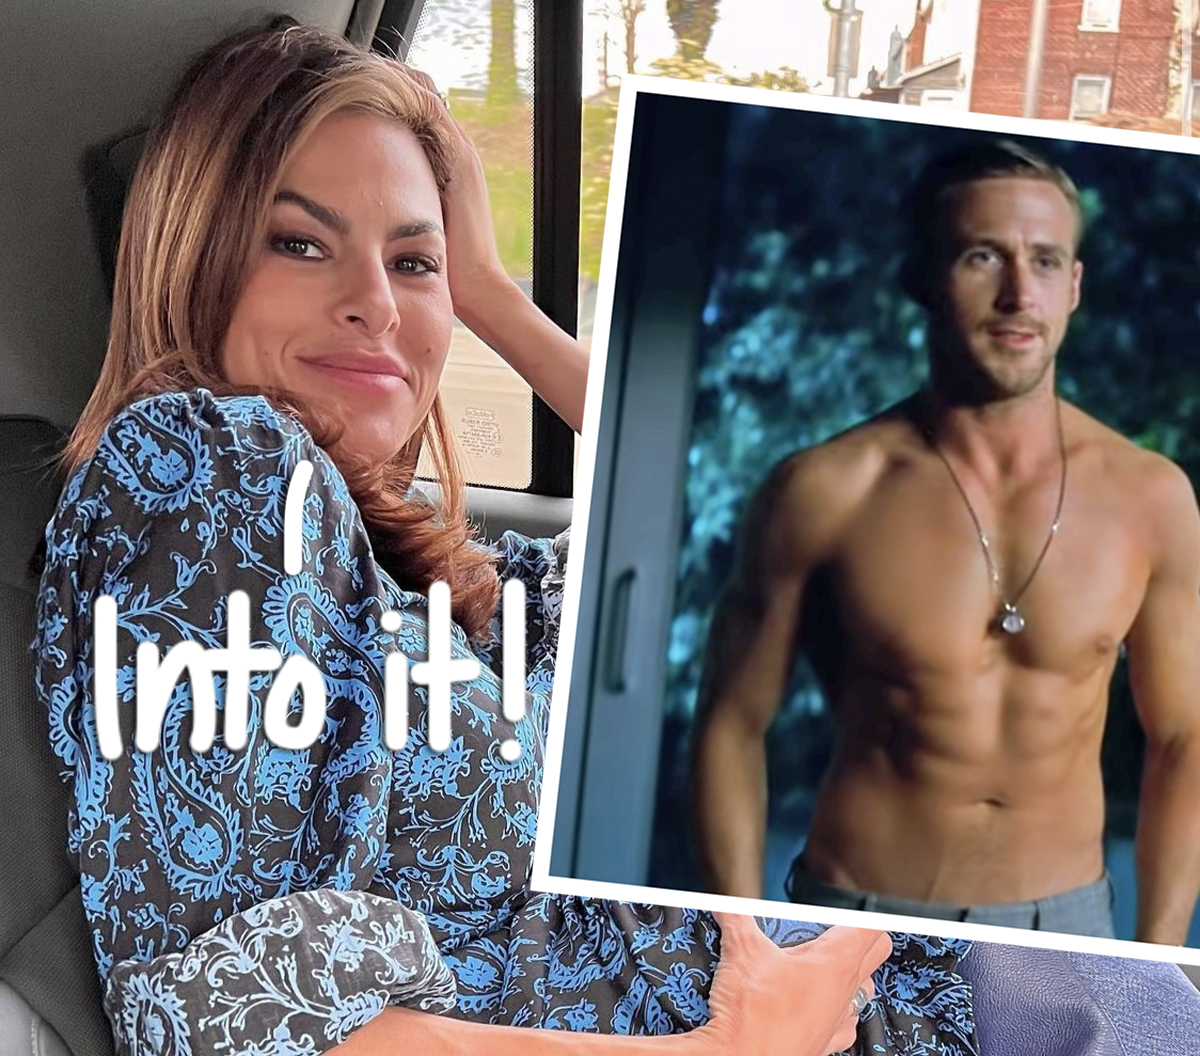 #Eva Mendes Drools Over Baby Daddy Ryan Gosling As Ken In THAT Jacked Photo From Barbie!